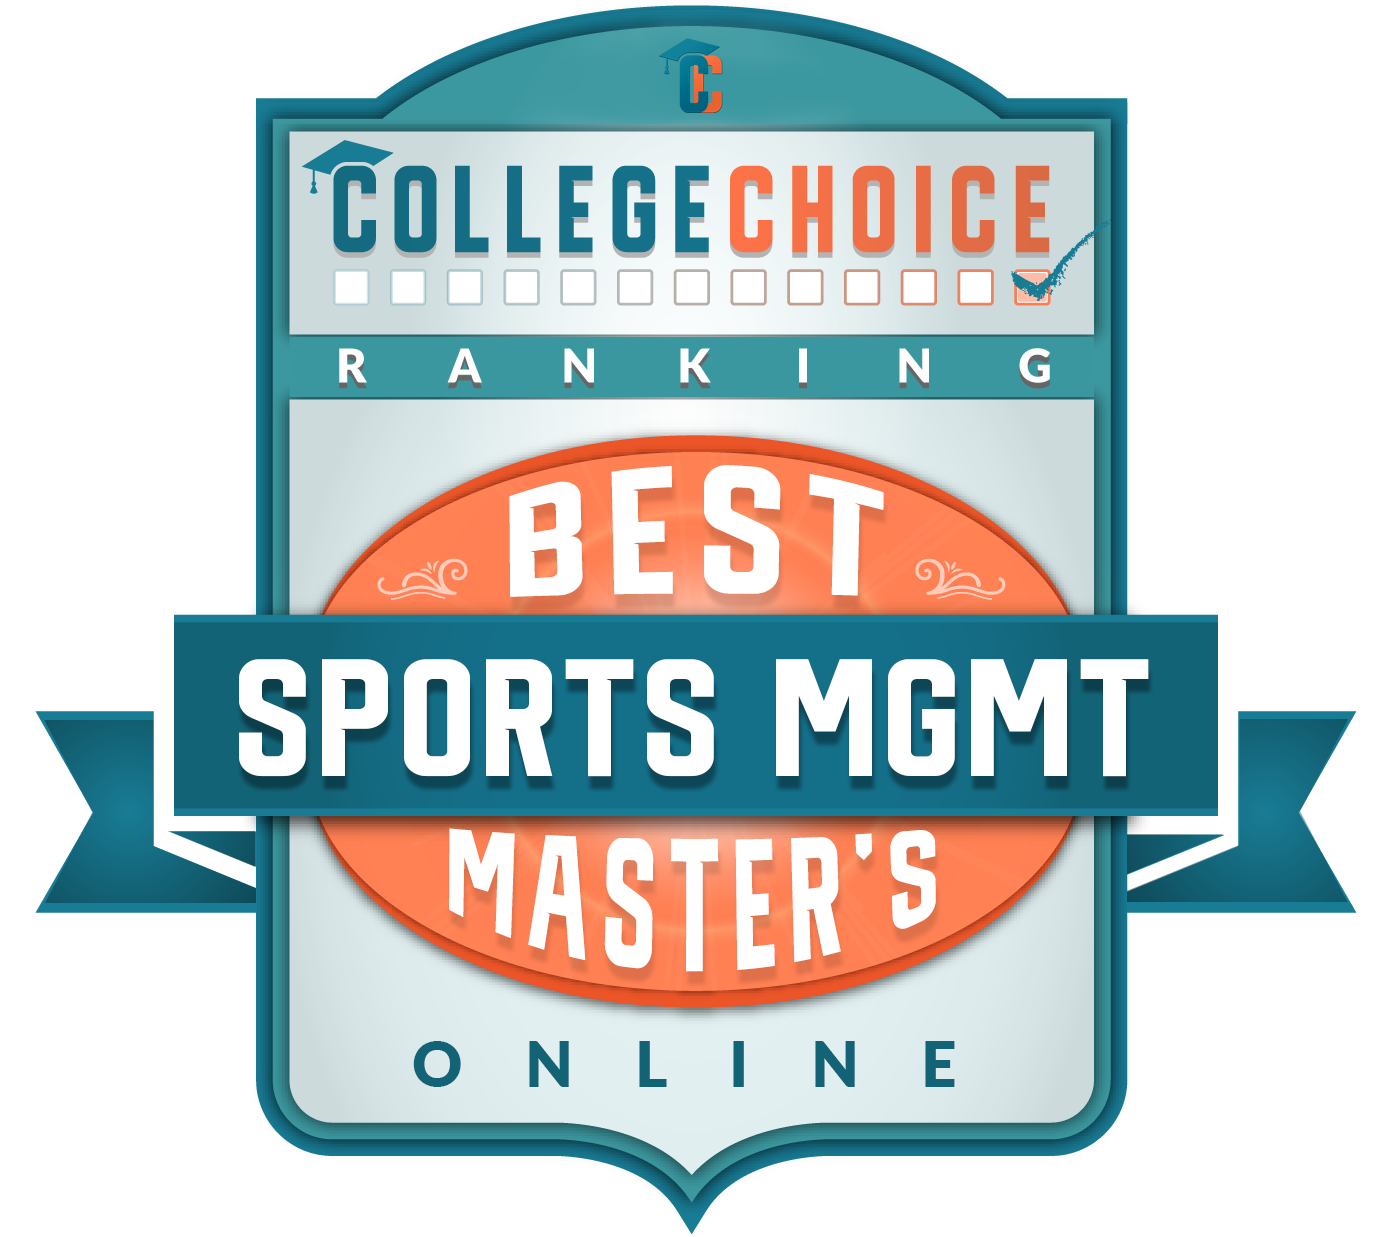 Liberty University Best Online Master's in Sports Management